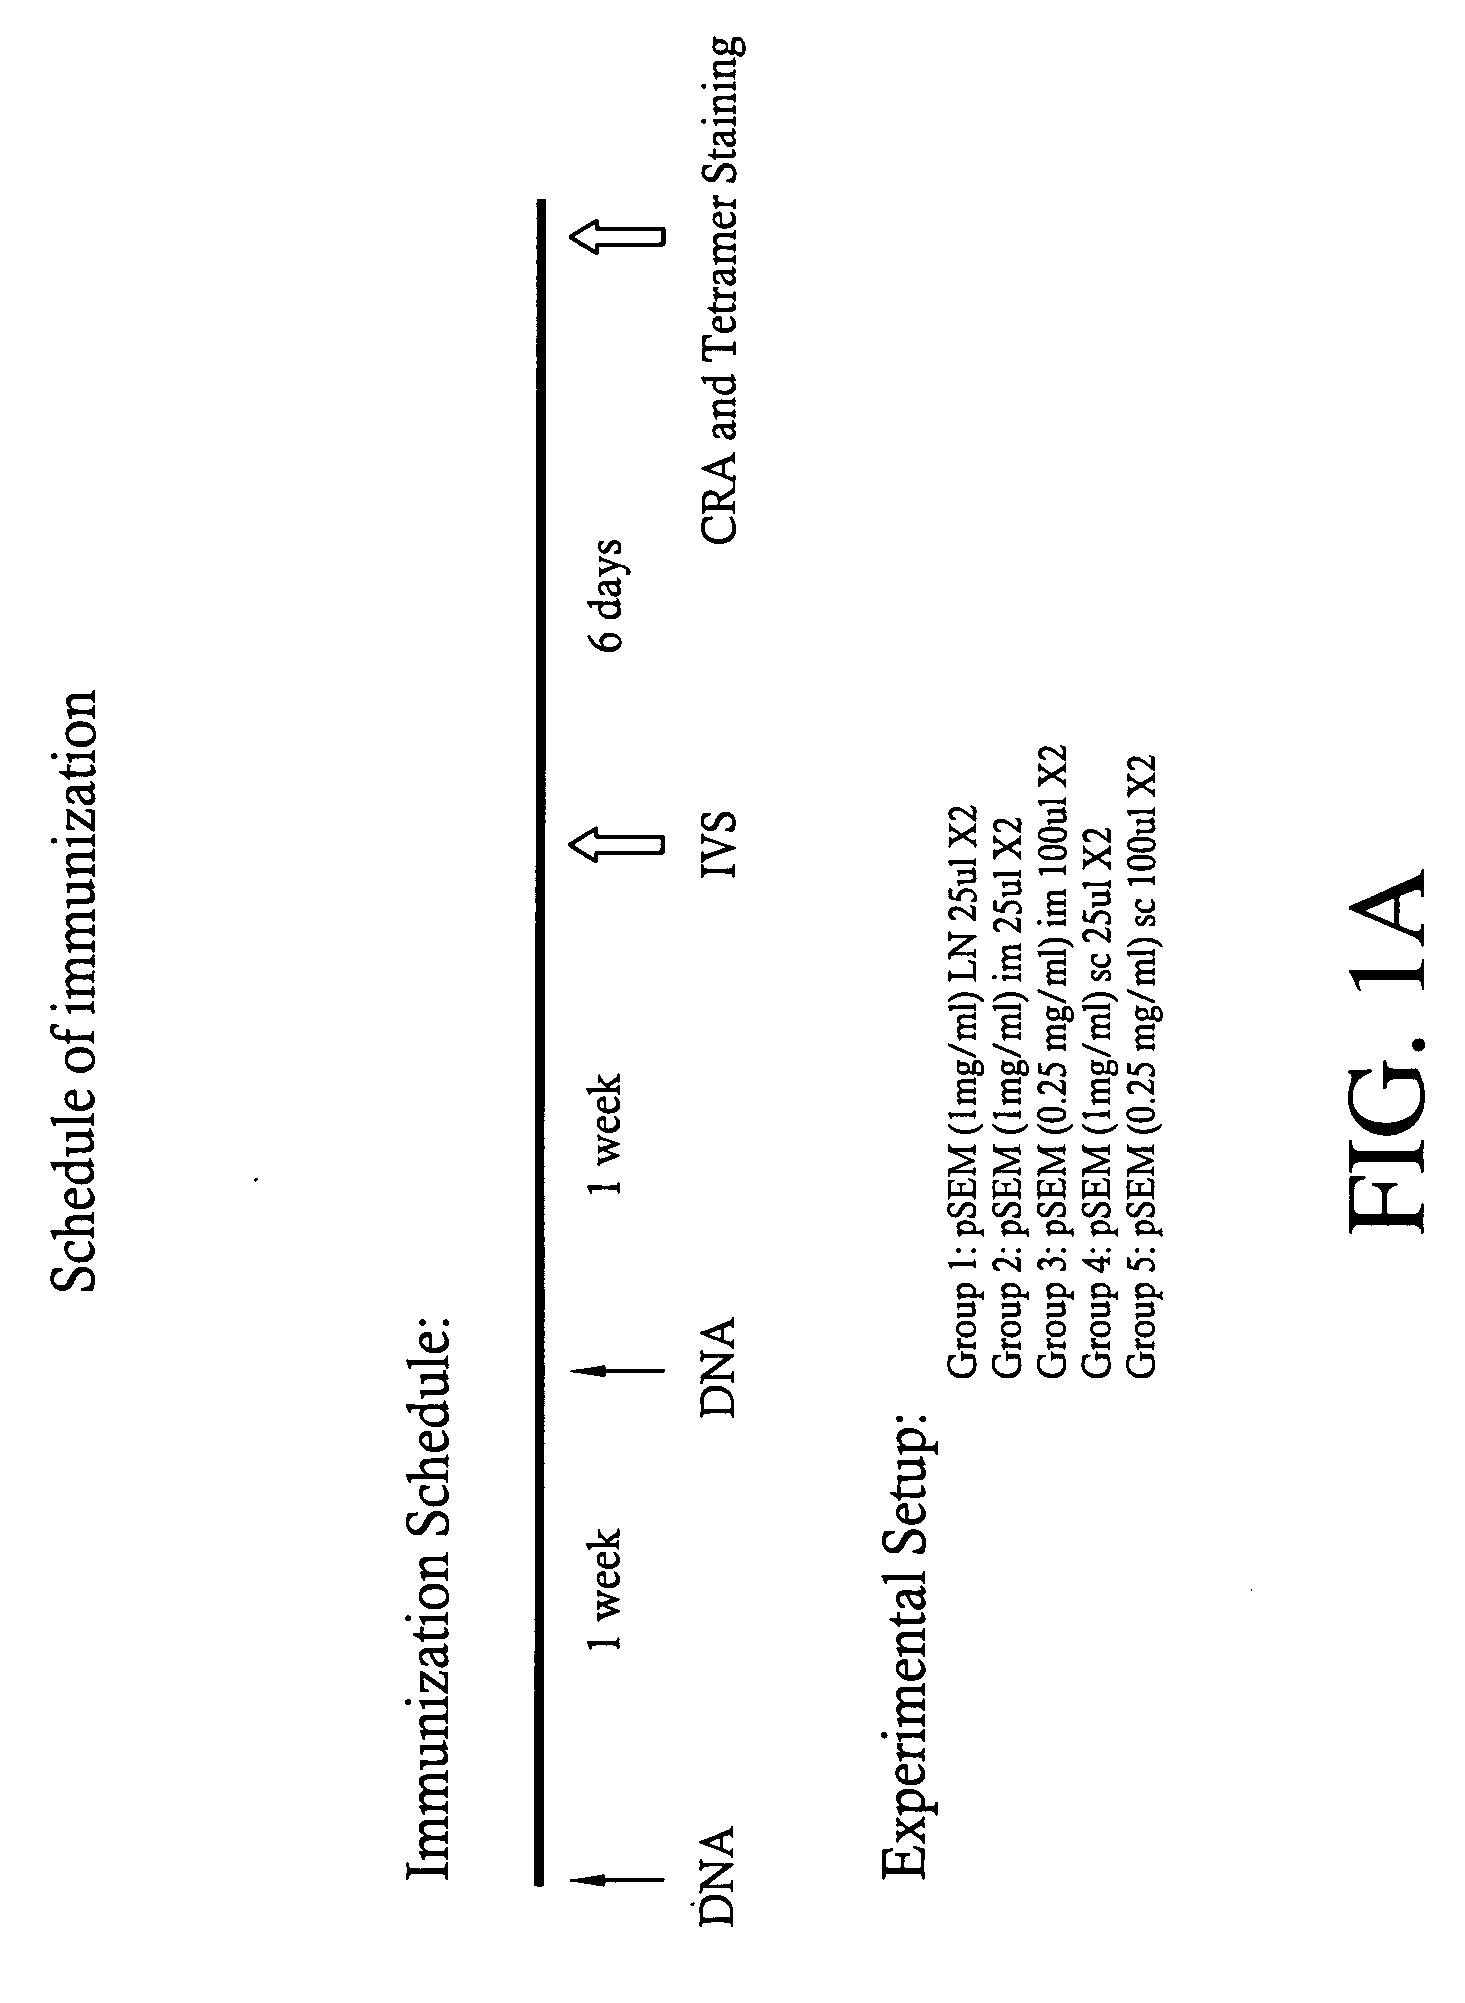 Methods to elicit, enhance and sustain immune responses against MHC class I-restricted epitopes, for prophylactic or therapeutic purposes